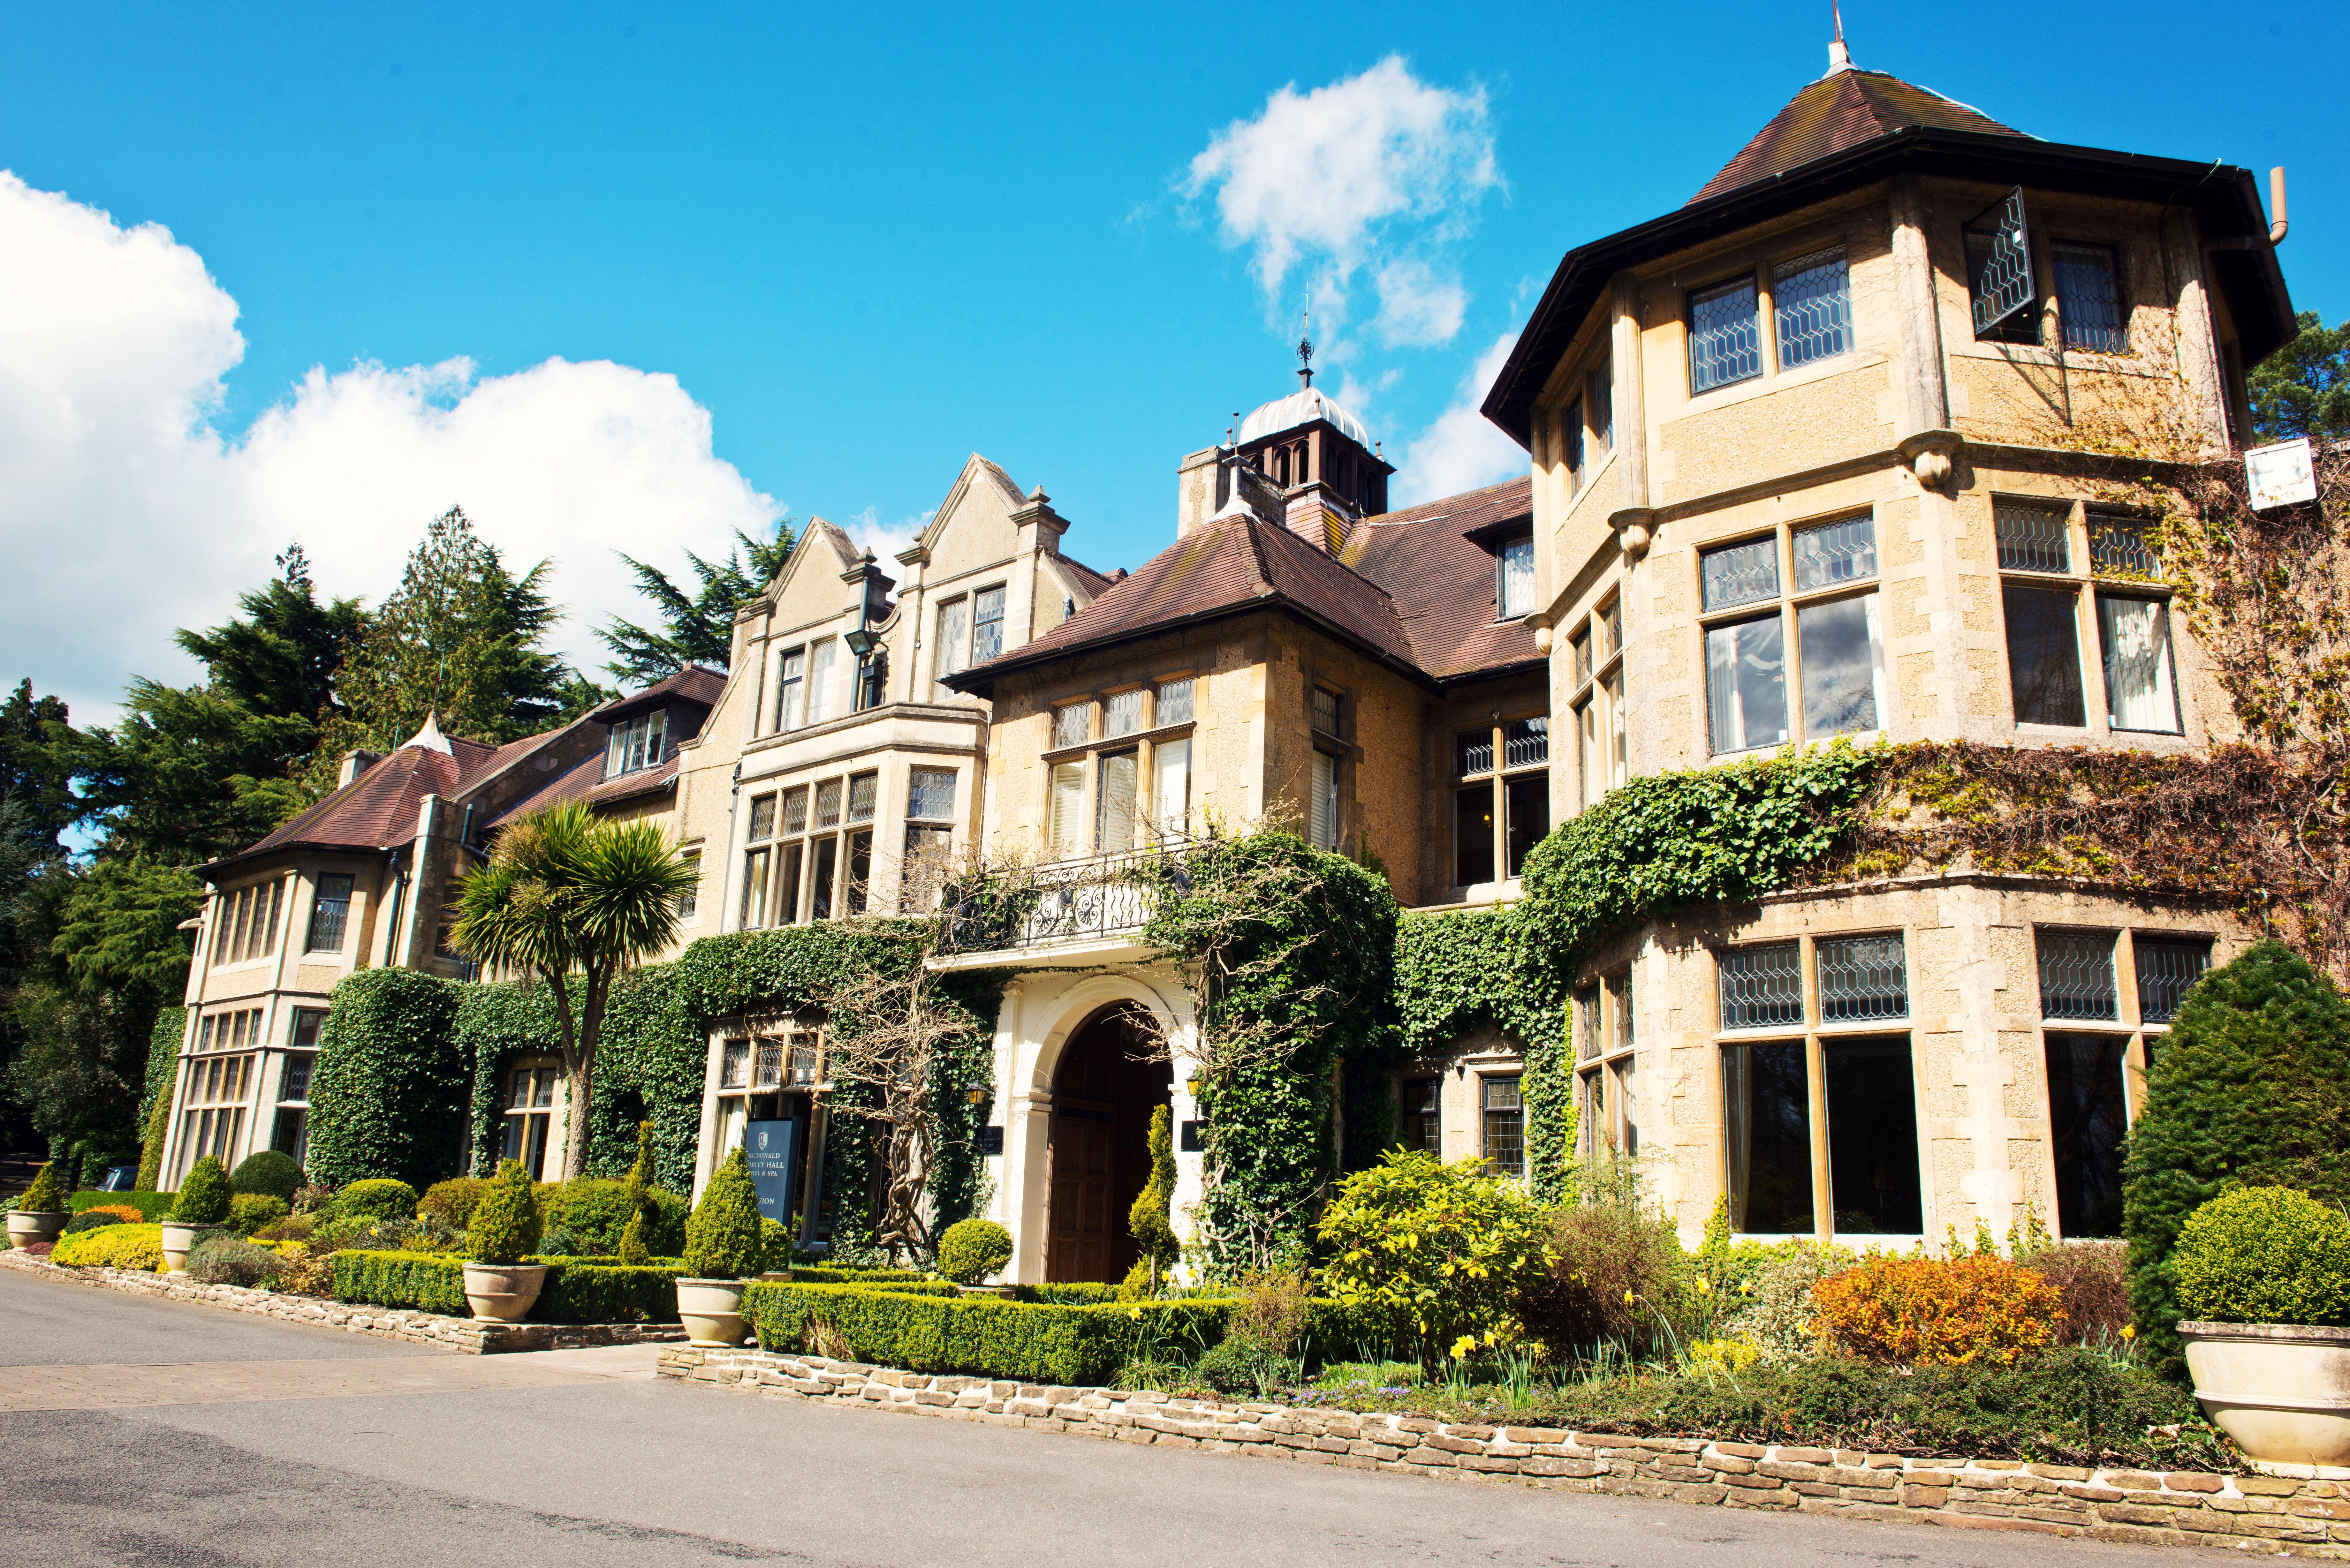 2 Night Ultimate Spa Break For Two, Macdonald Frimley Hall Hotel And S